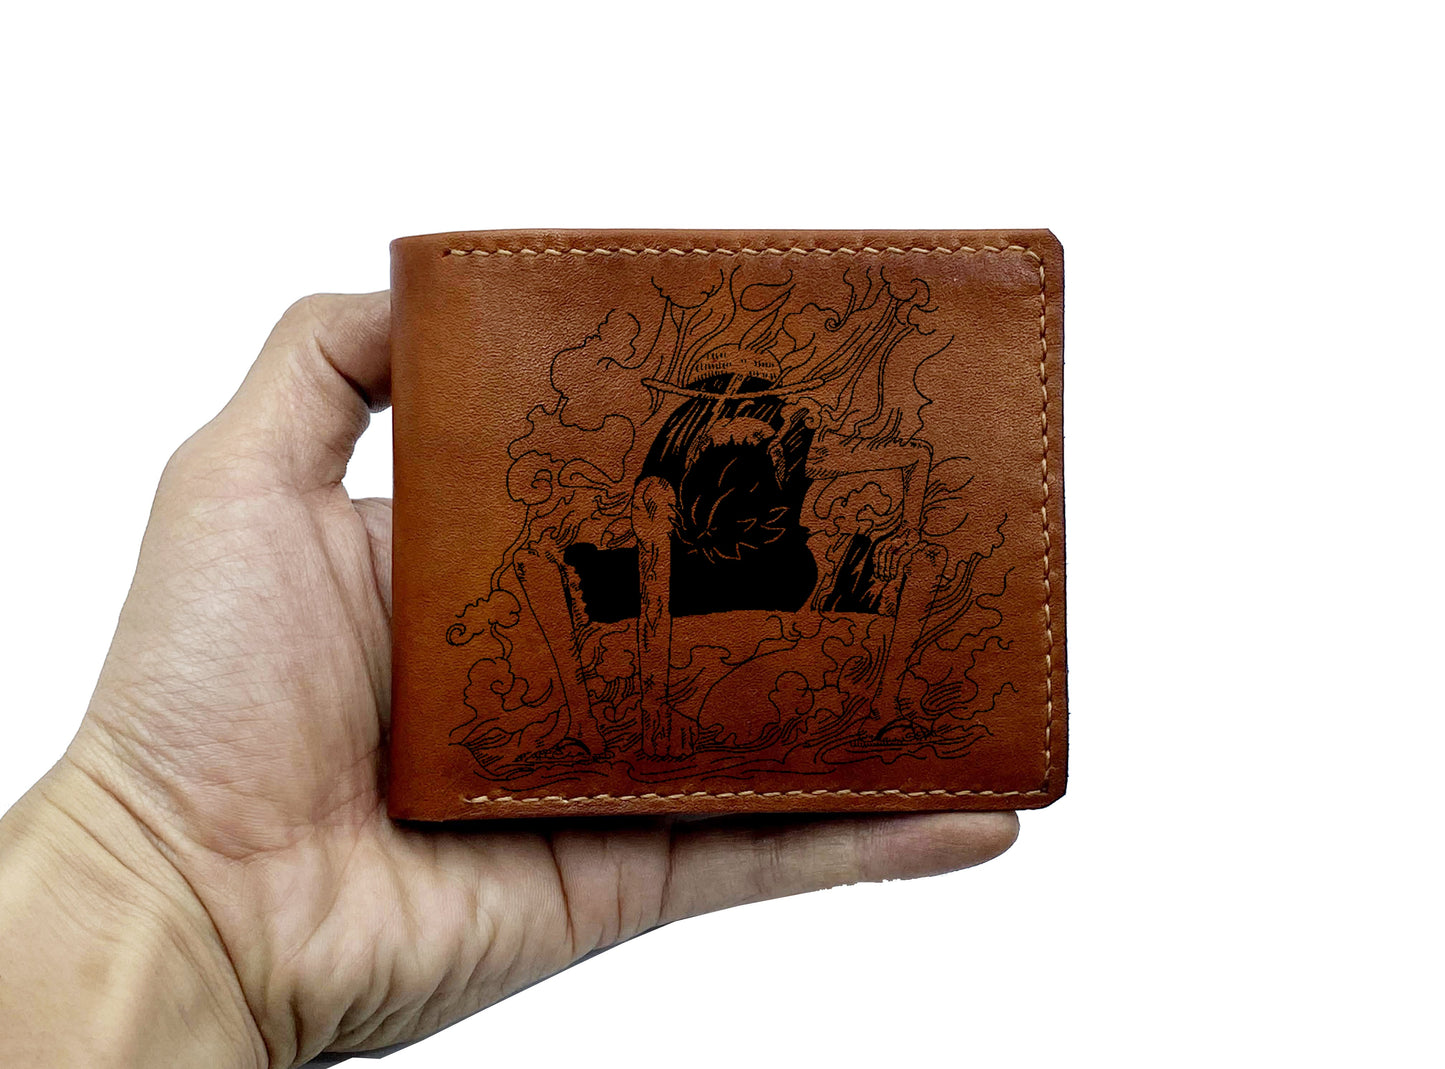 Mayan Corner - Personalized leather handmade wallet, One piece anime Japan leather gift, One piece pirate wallet for dad, boyfriend